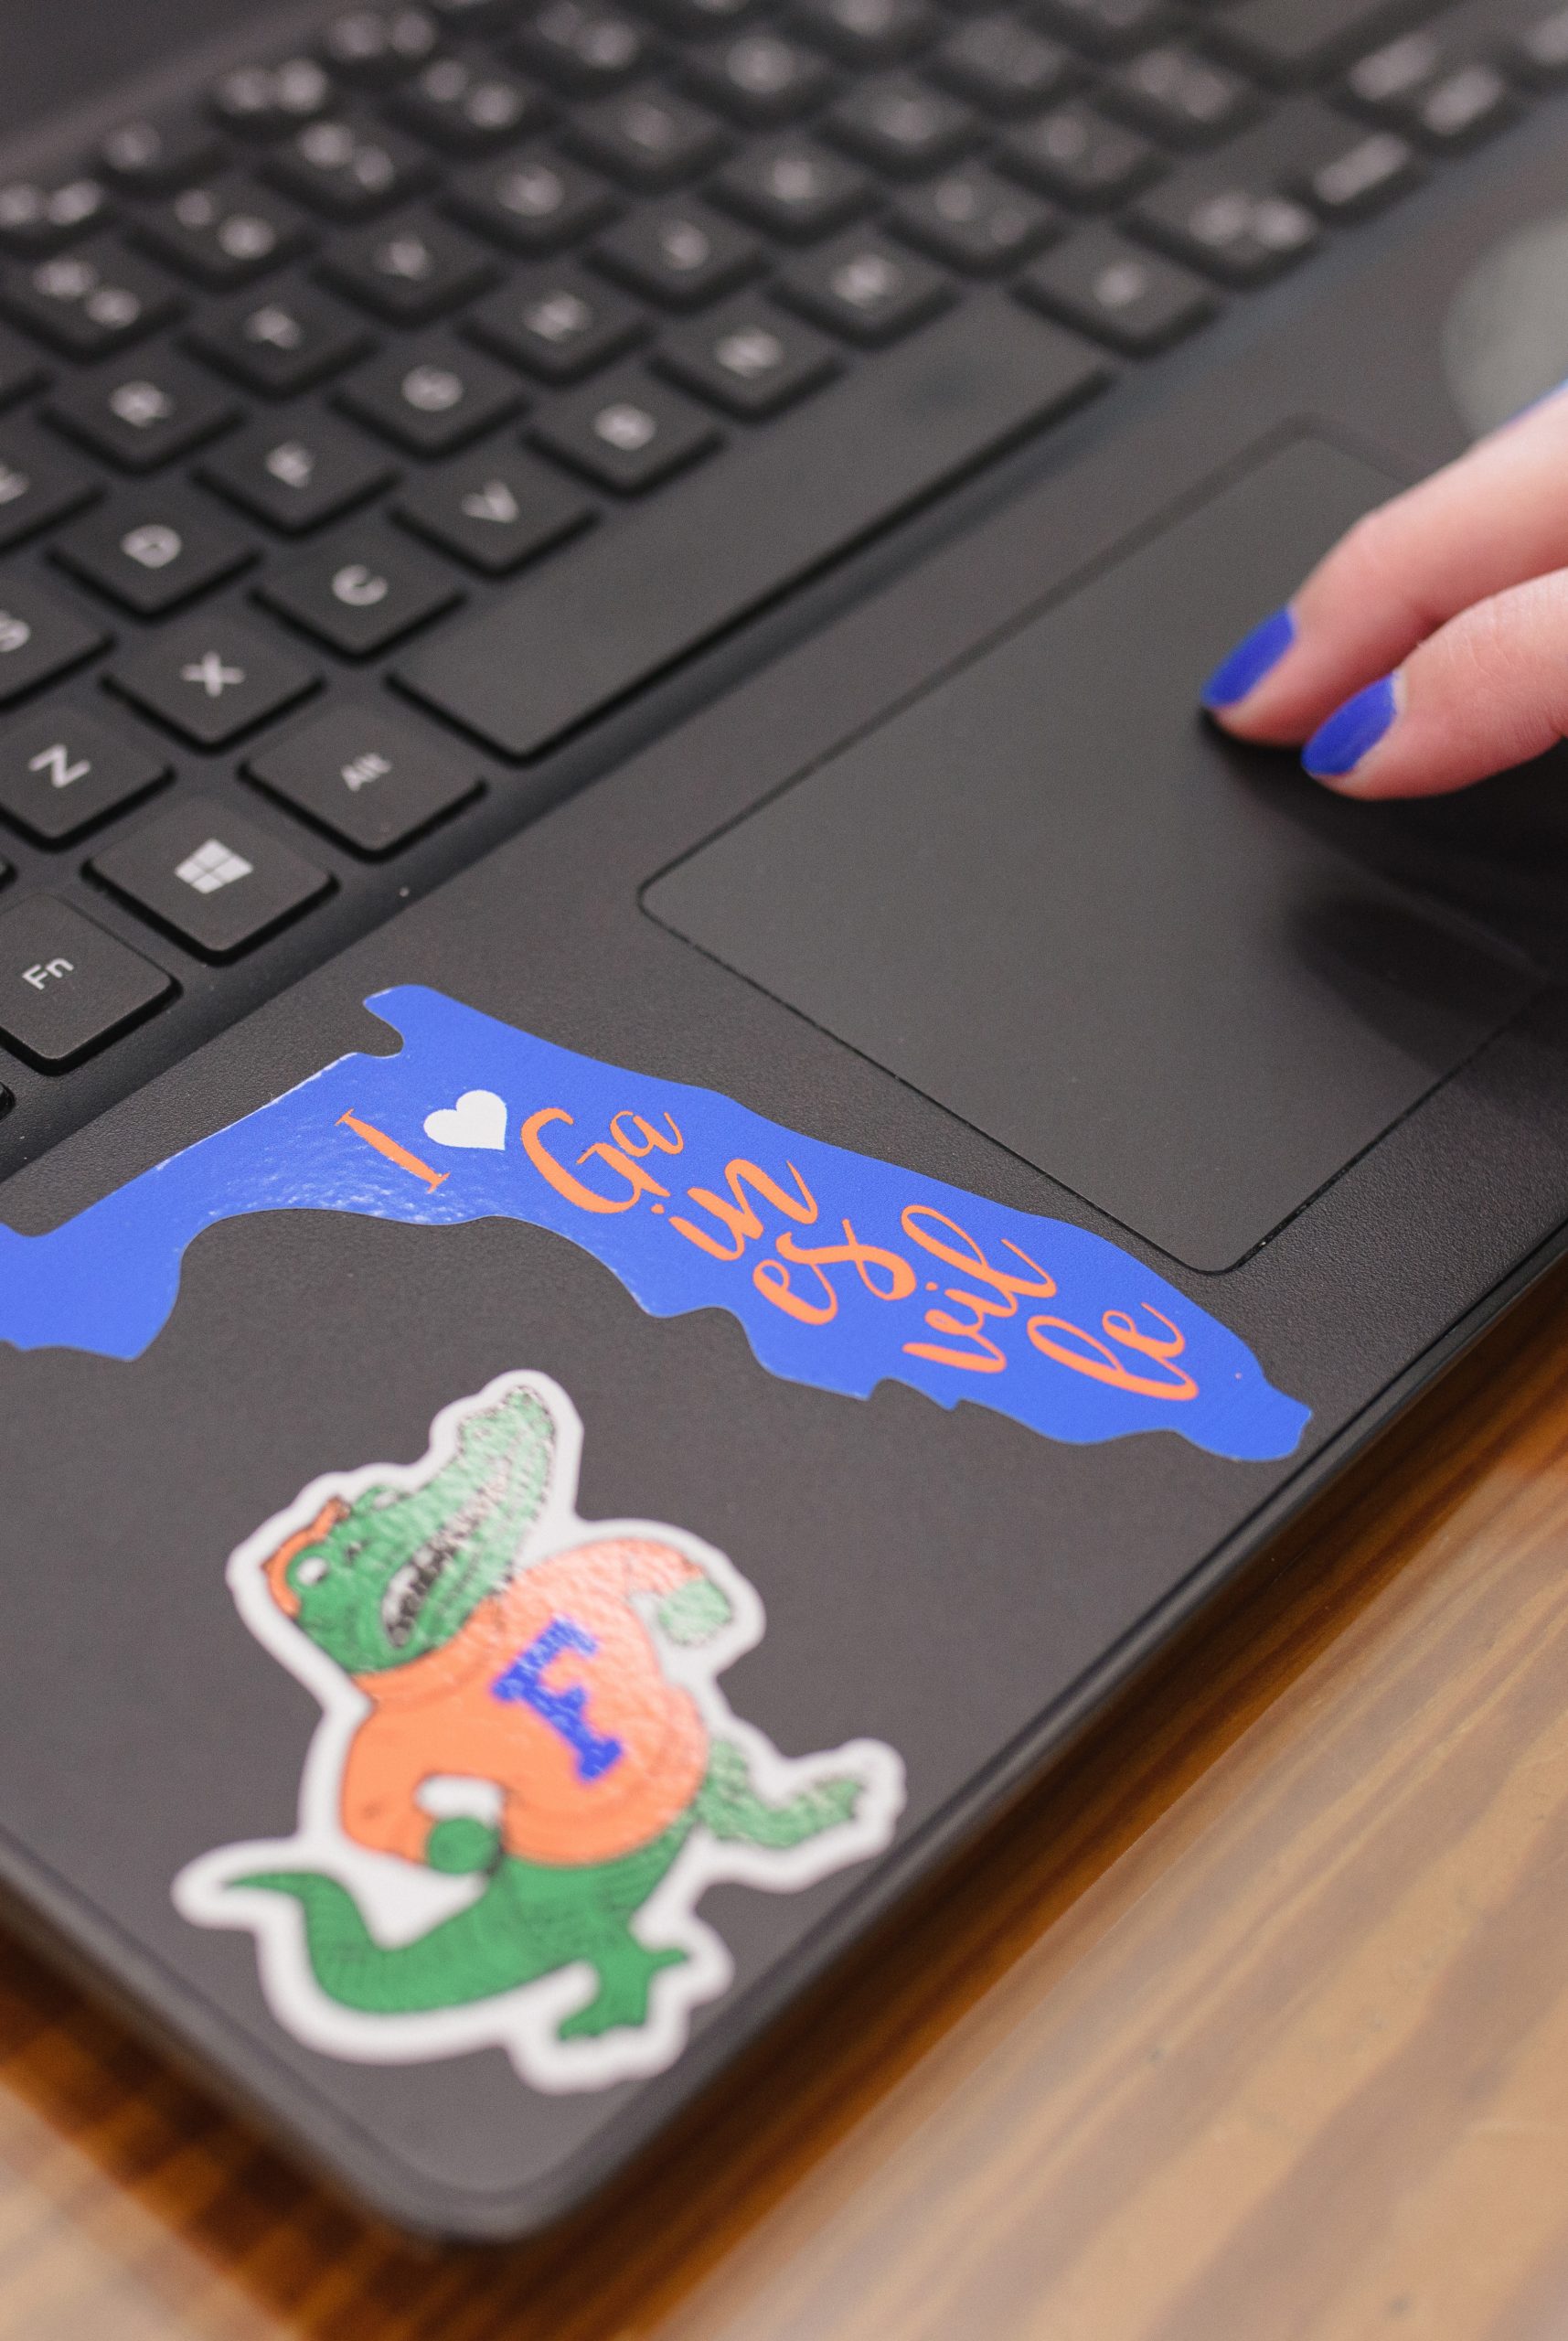 A fighting albert and a state of florida sticker on a black laptop.